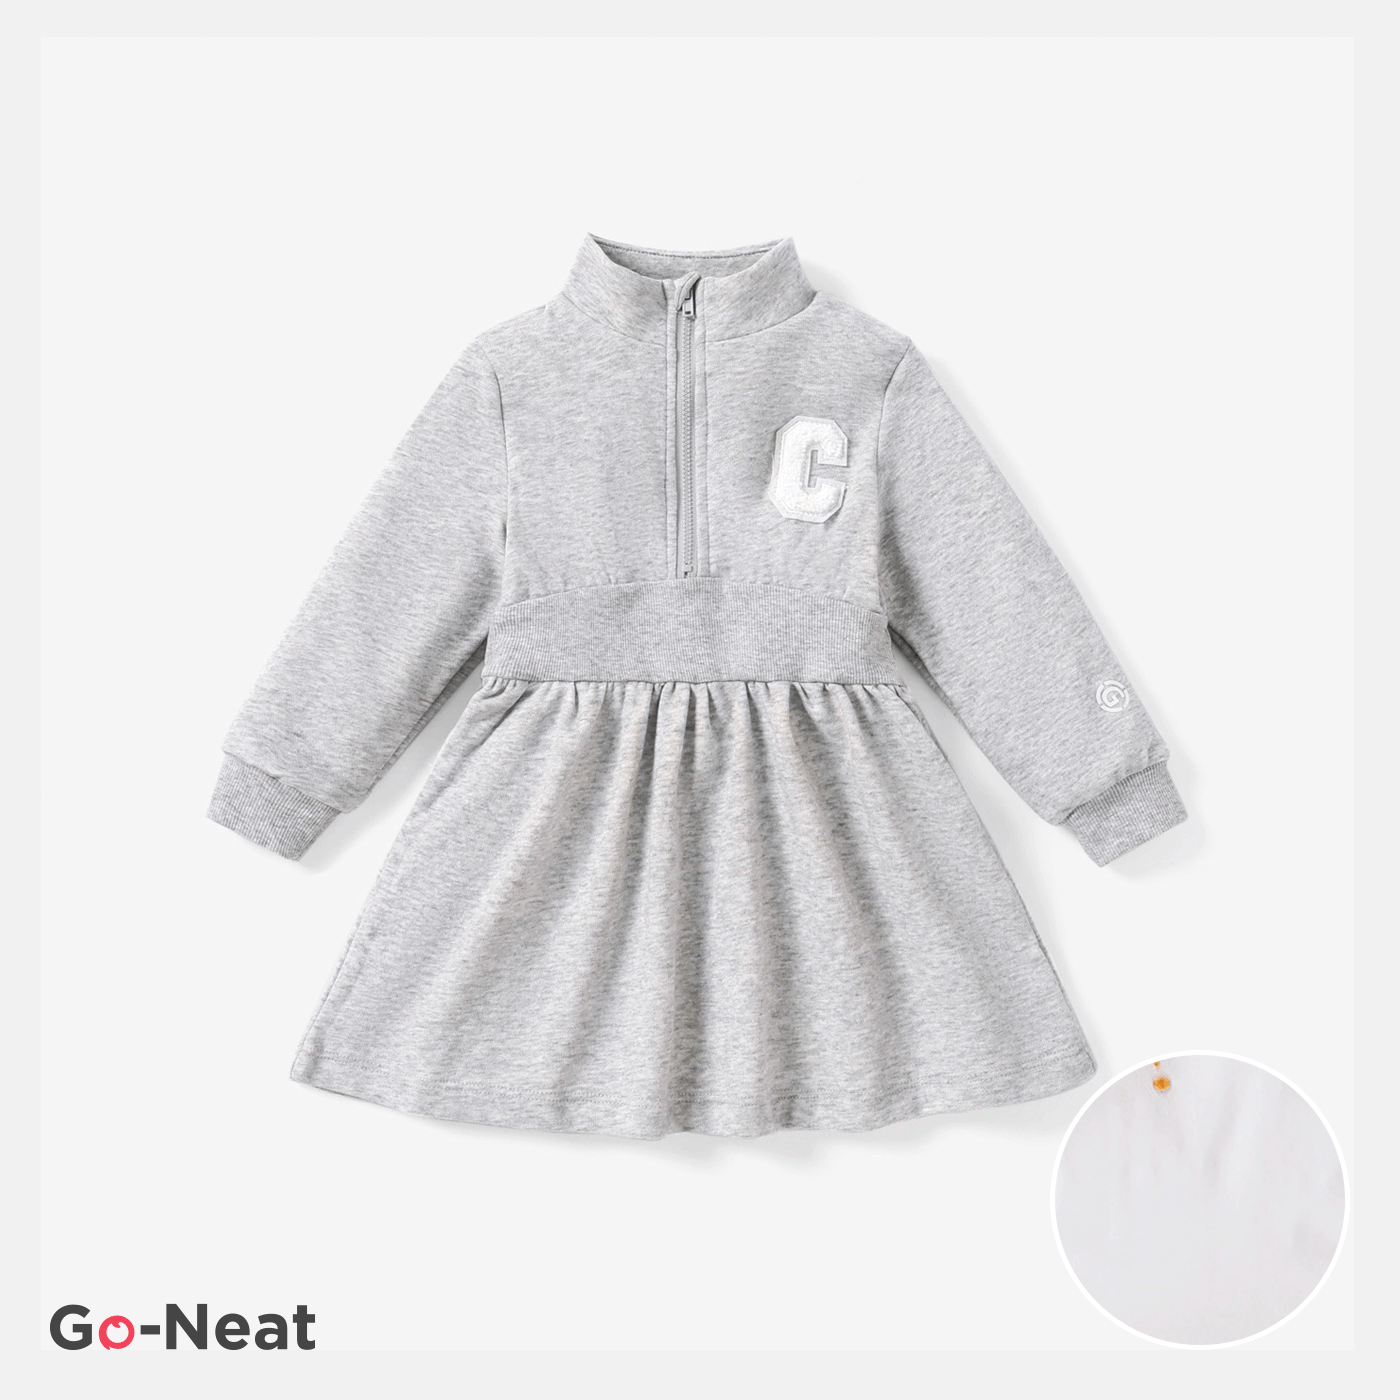 Go-Neat Toddler Girl Casual Solid Color Long Sleeve Dress